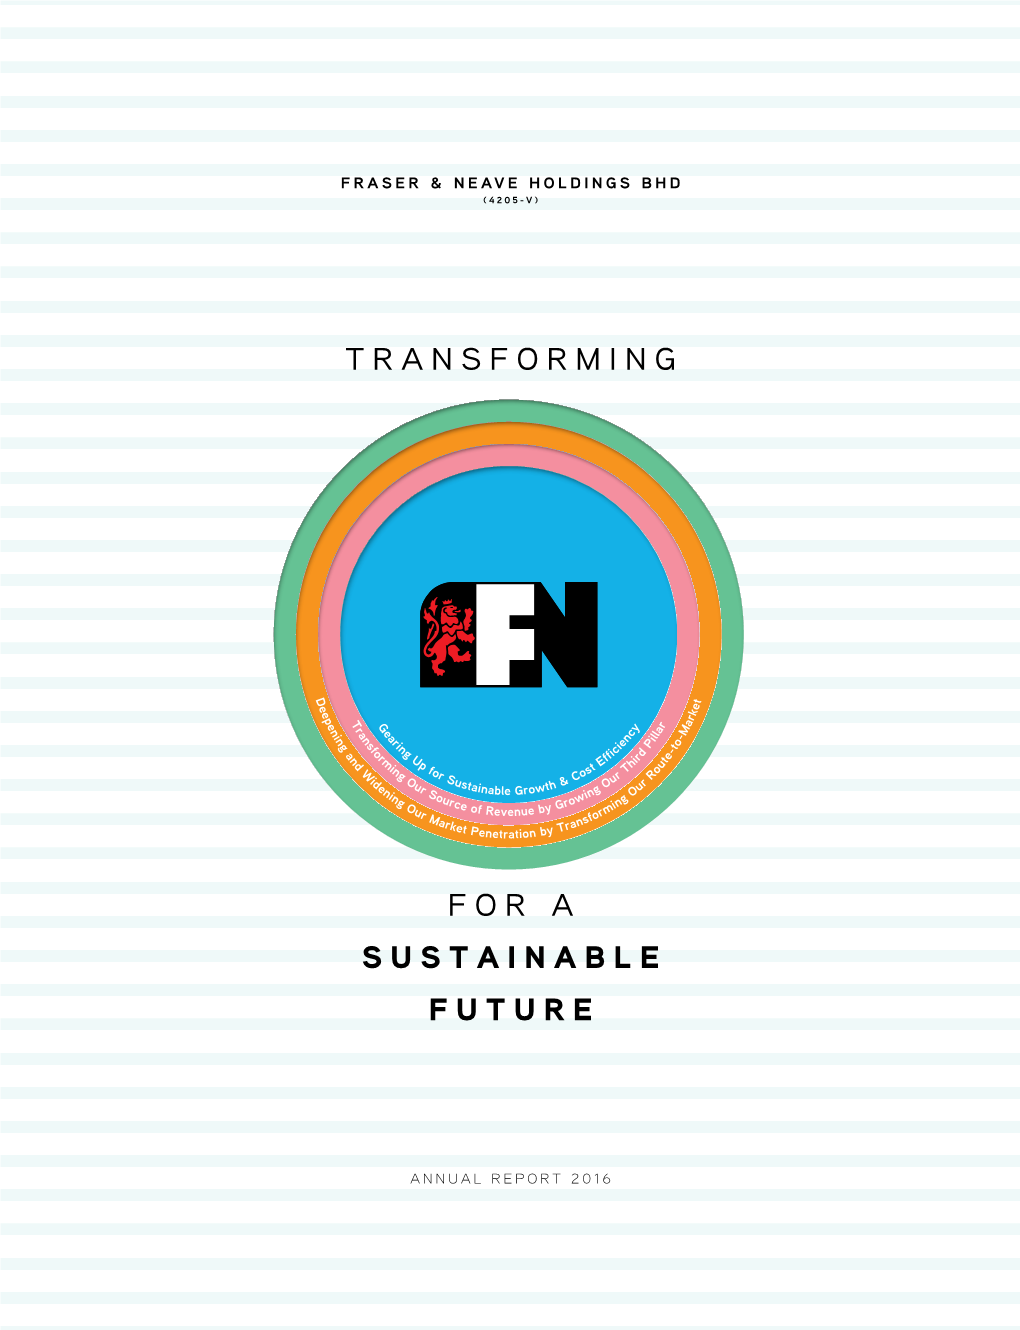 ANNUAL REPORT 2016 Transforming F&N for a Sustainable Future